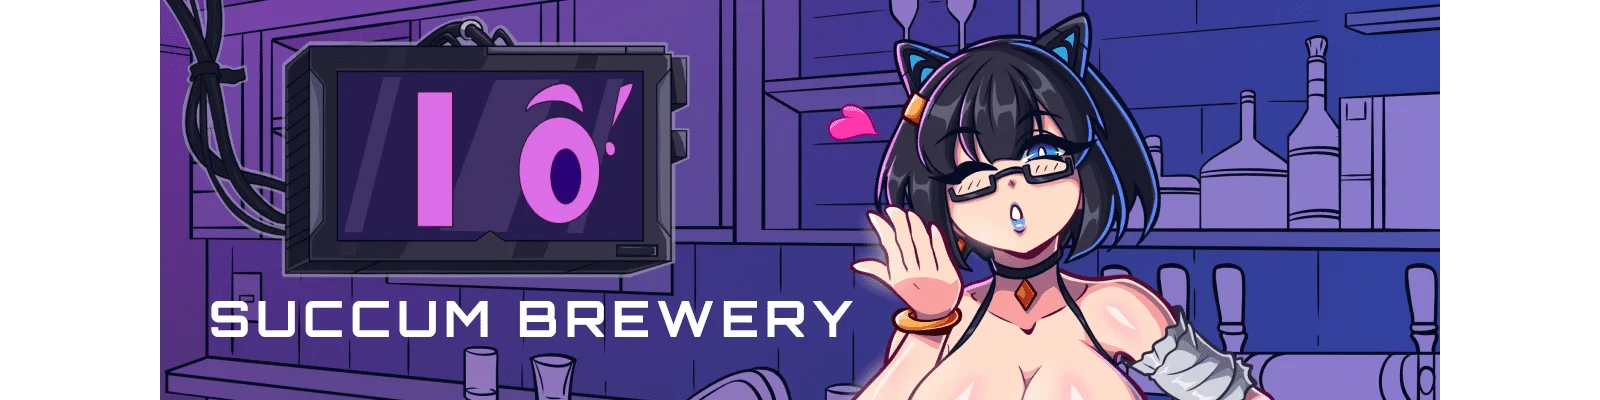 LimeJuiceGames - Succum Brewery - Version 0.2.3b